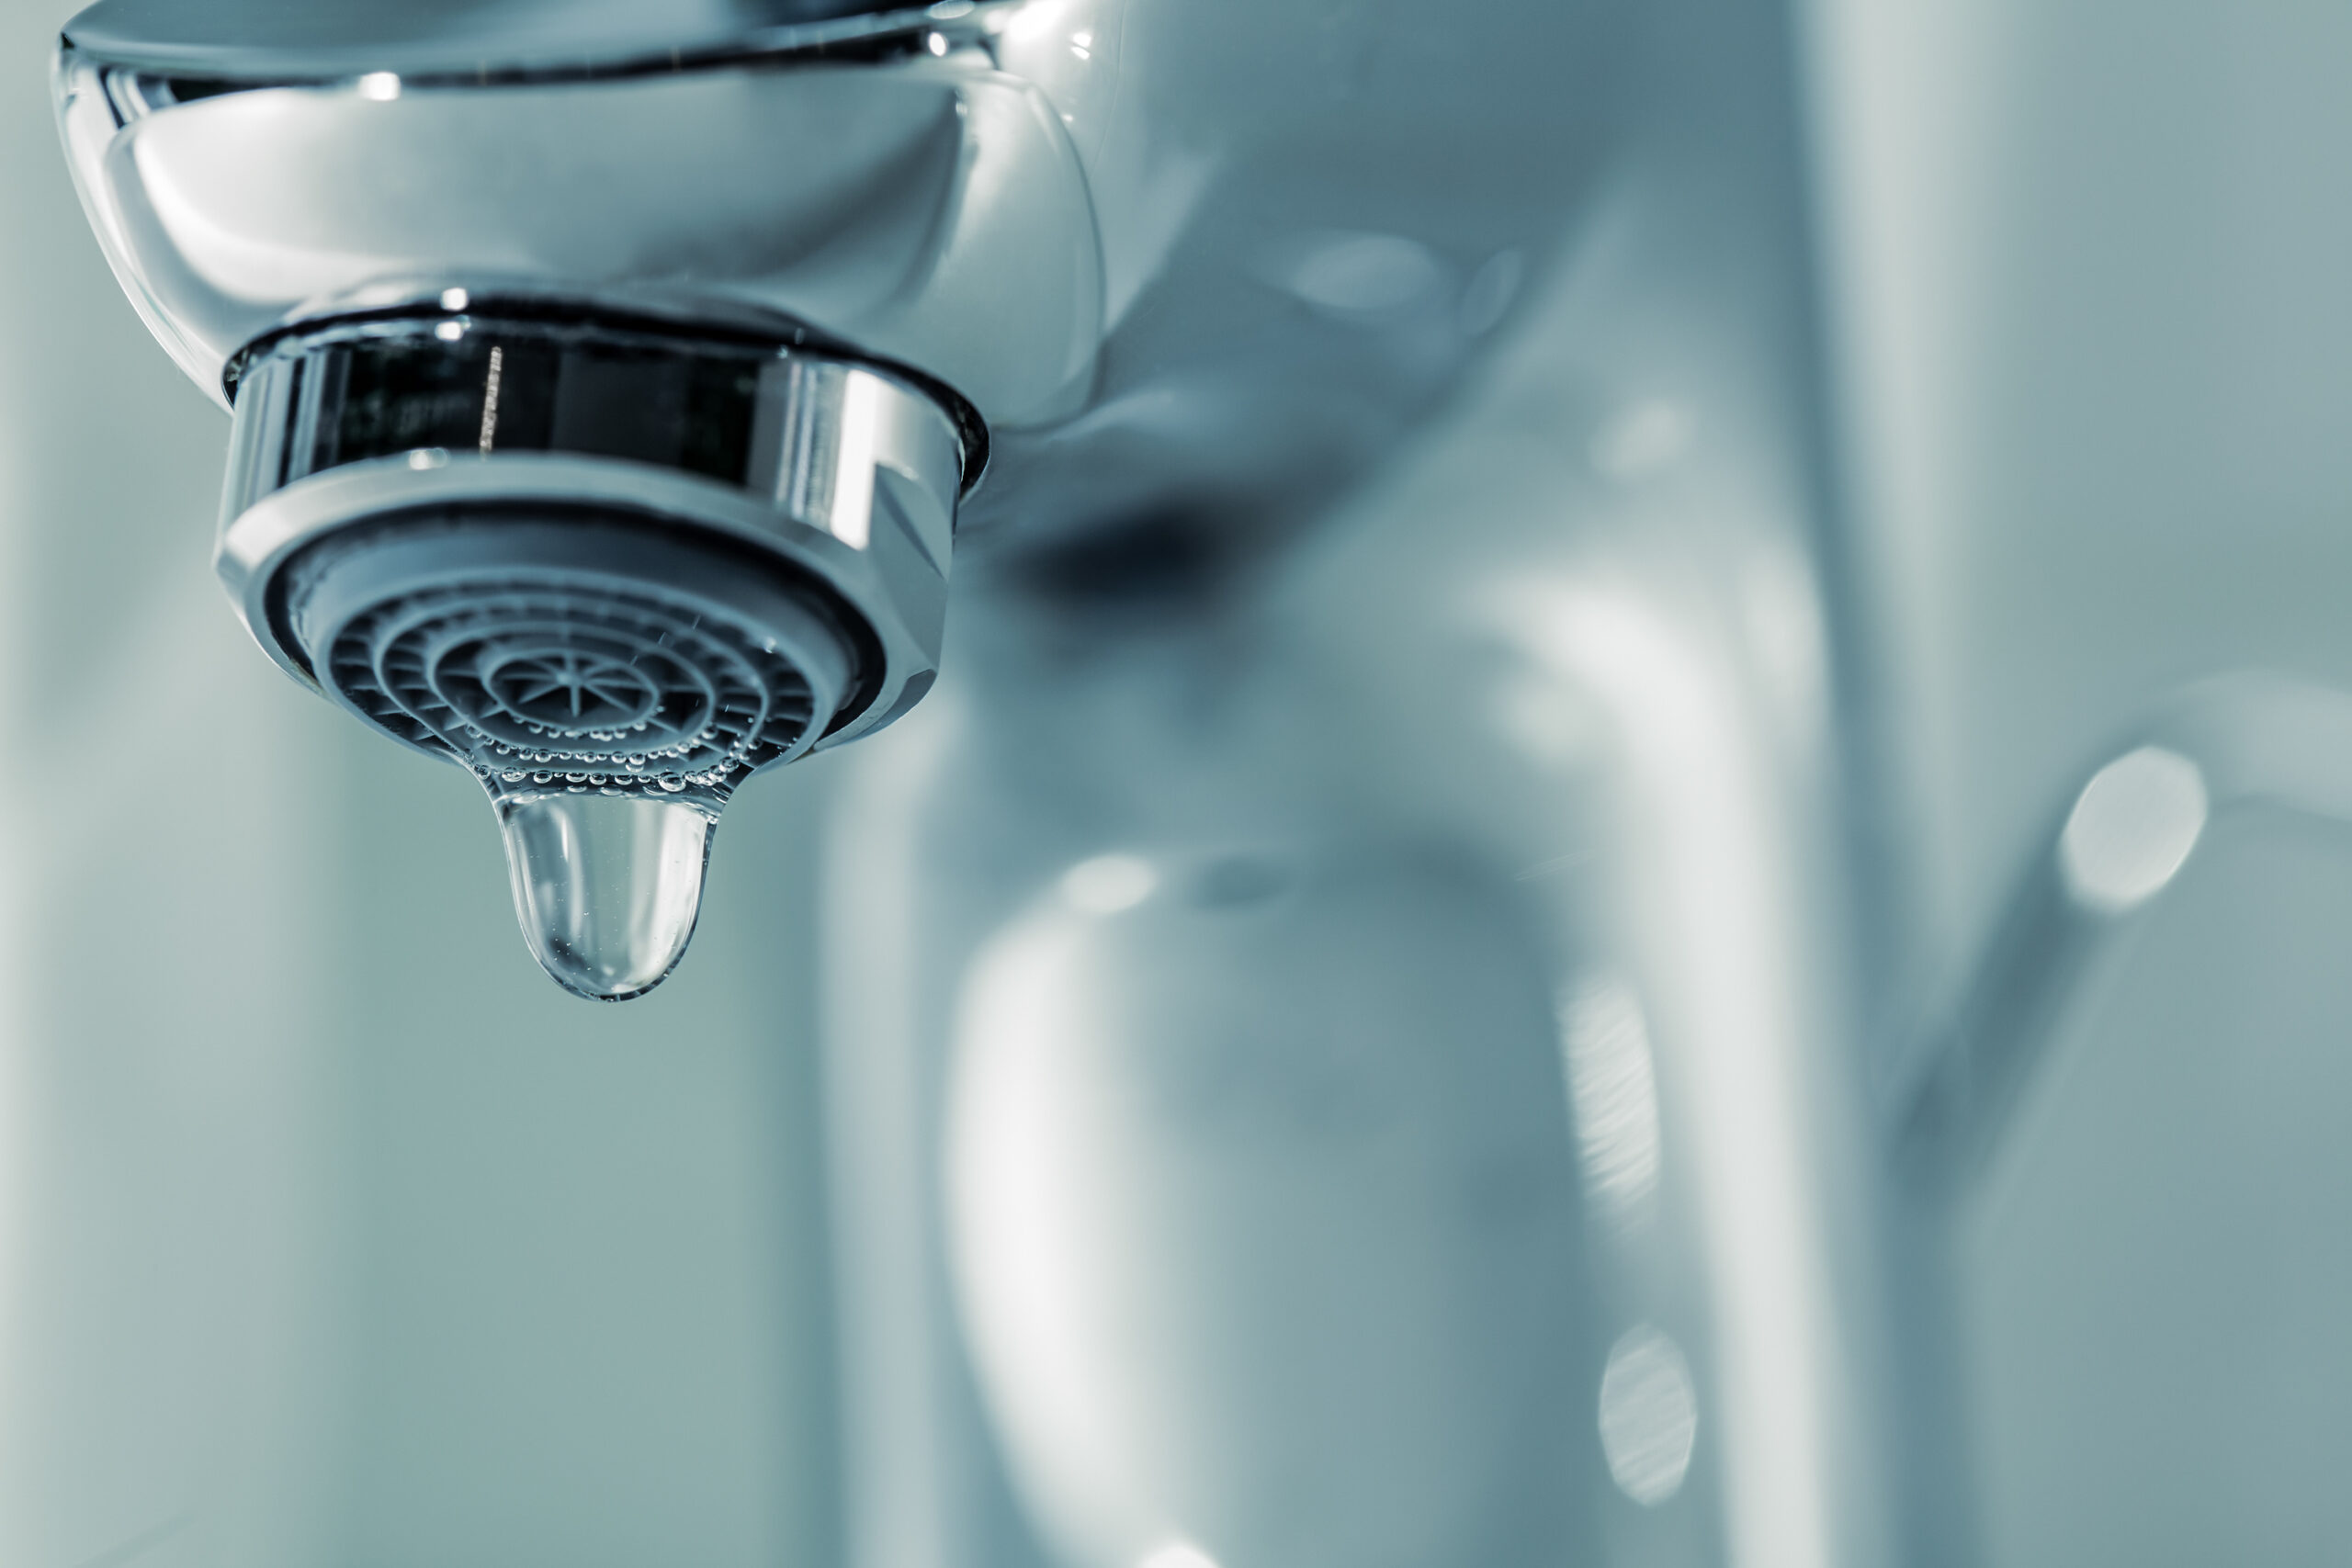 How Much Does It Cost To Replace A Bathtub Faucet?